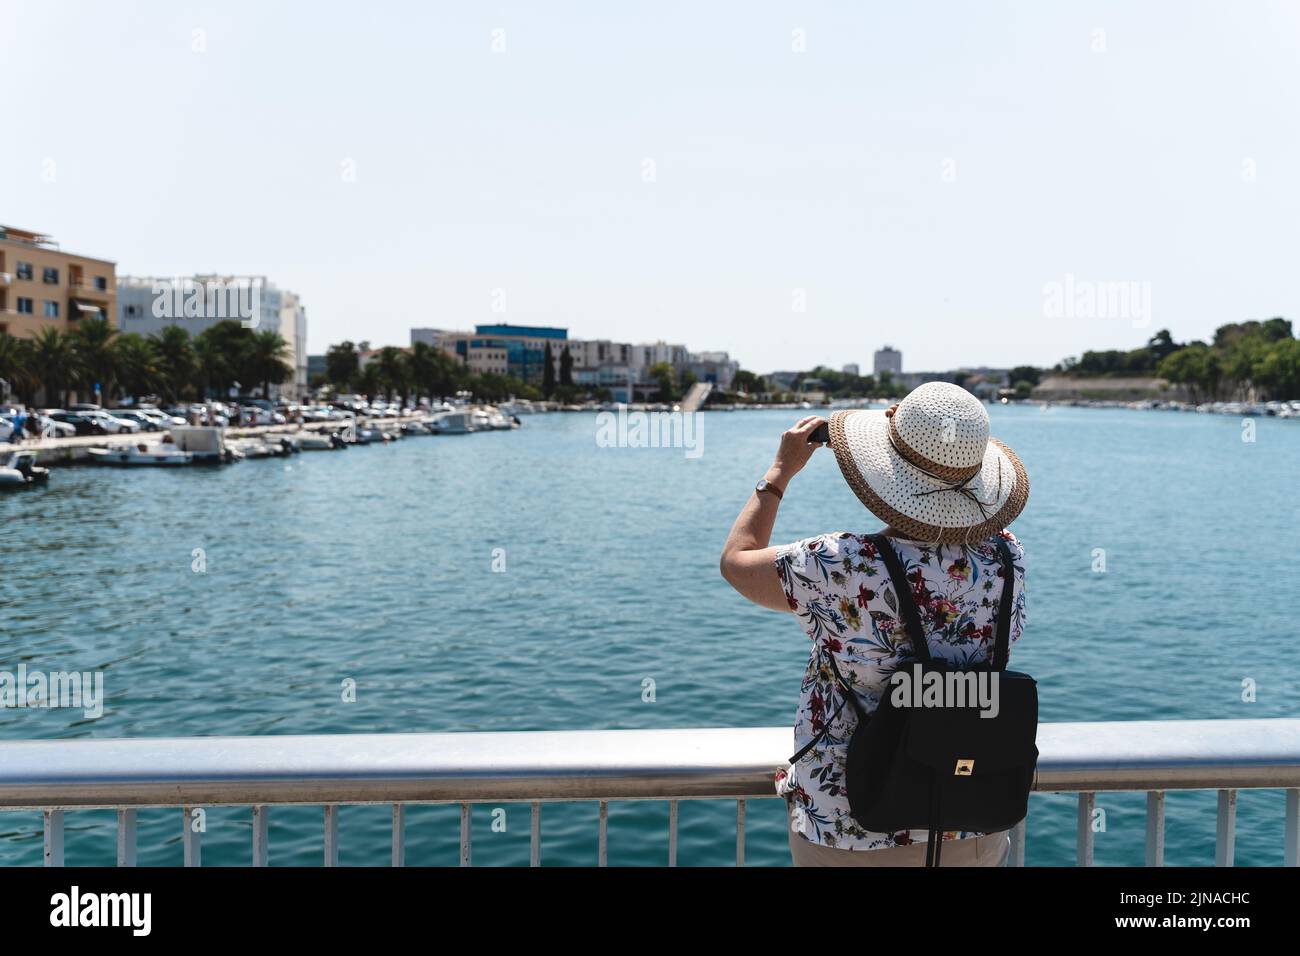 Zadar, Croatia - 26 July 2022: Rear View Of A Woman Taking Photos Of The City With Her Camera During Summer Vacation In The City Of Zadar In Croatia. Stock Photo